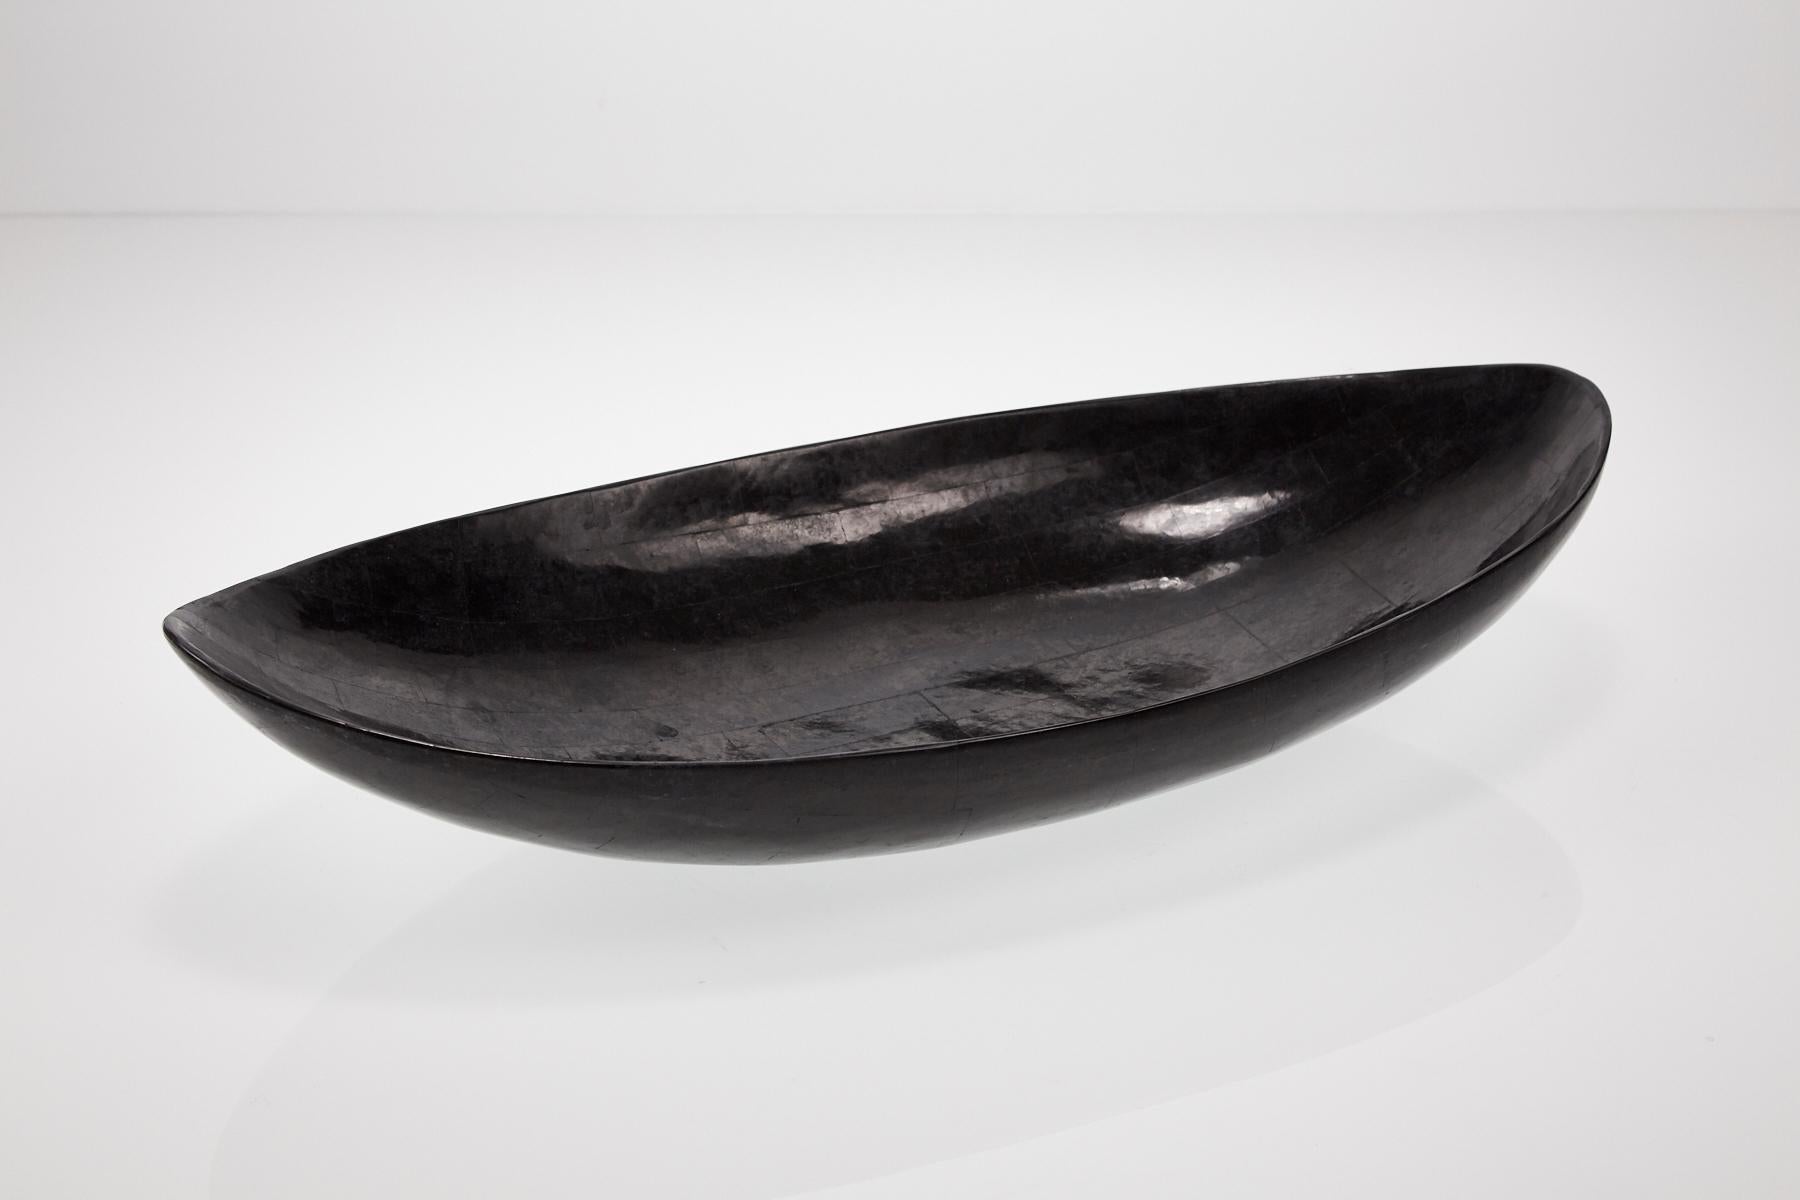 Decorative low bowl or platter hand-inlaid with black stone. Set upon small raised base.

All furnishings are made from 100% natural Fossil Stone or Seashell inlay, carefully hand cut and crafted piece-by-piece and precisely inlaid to the form of